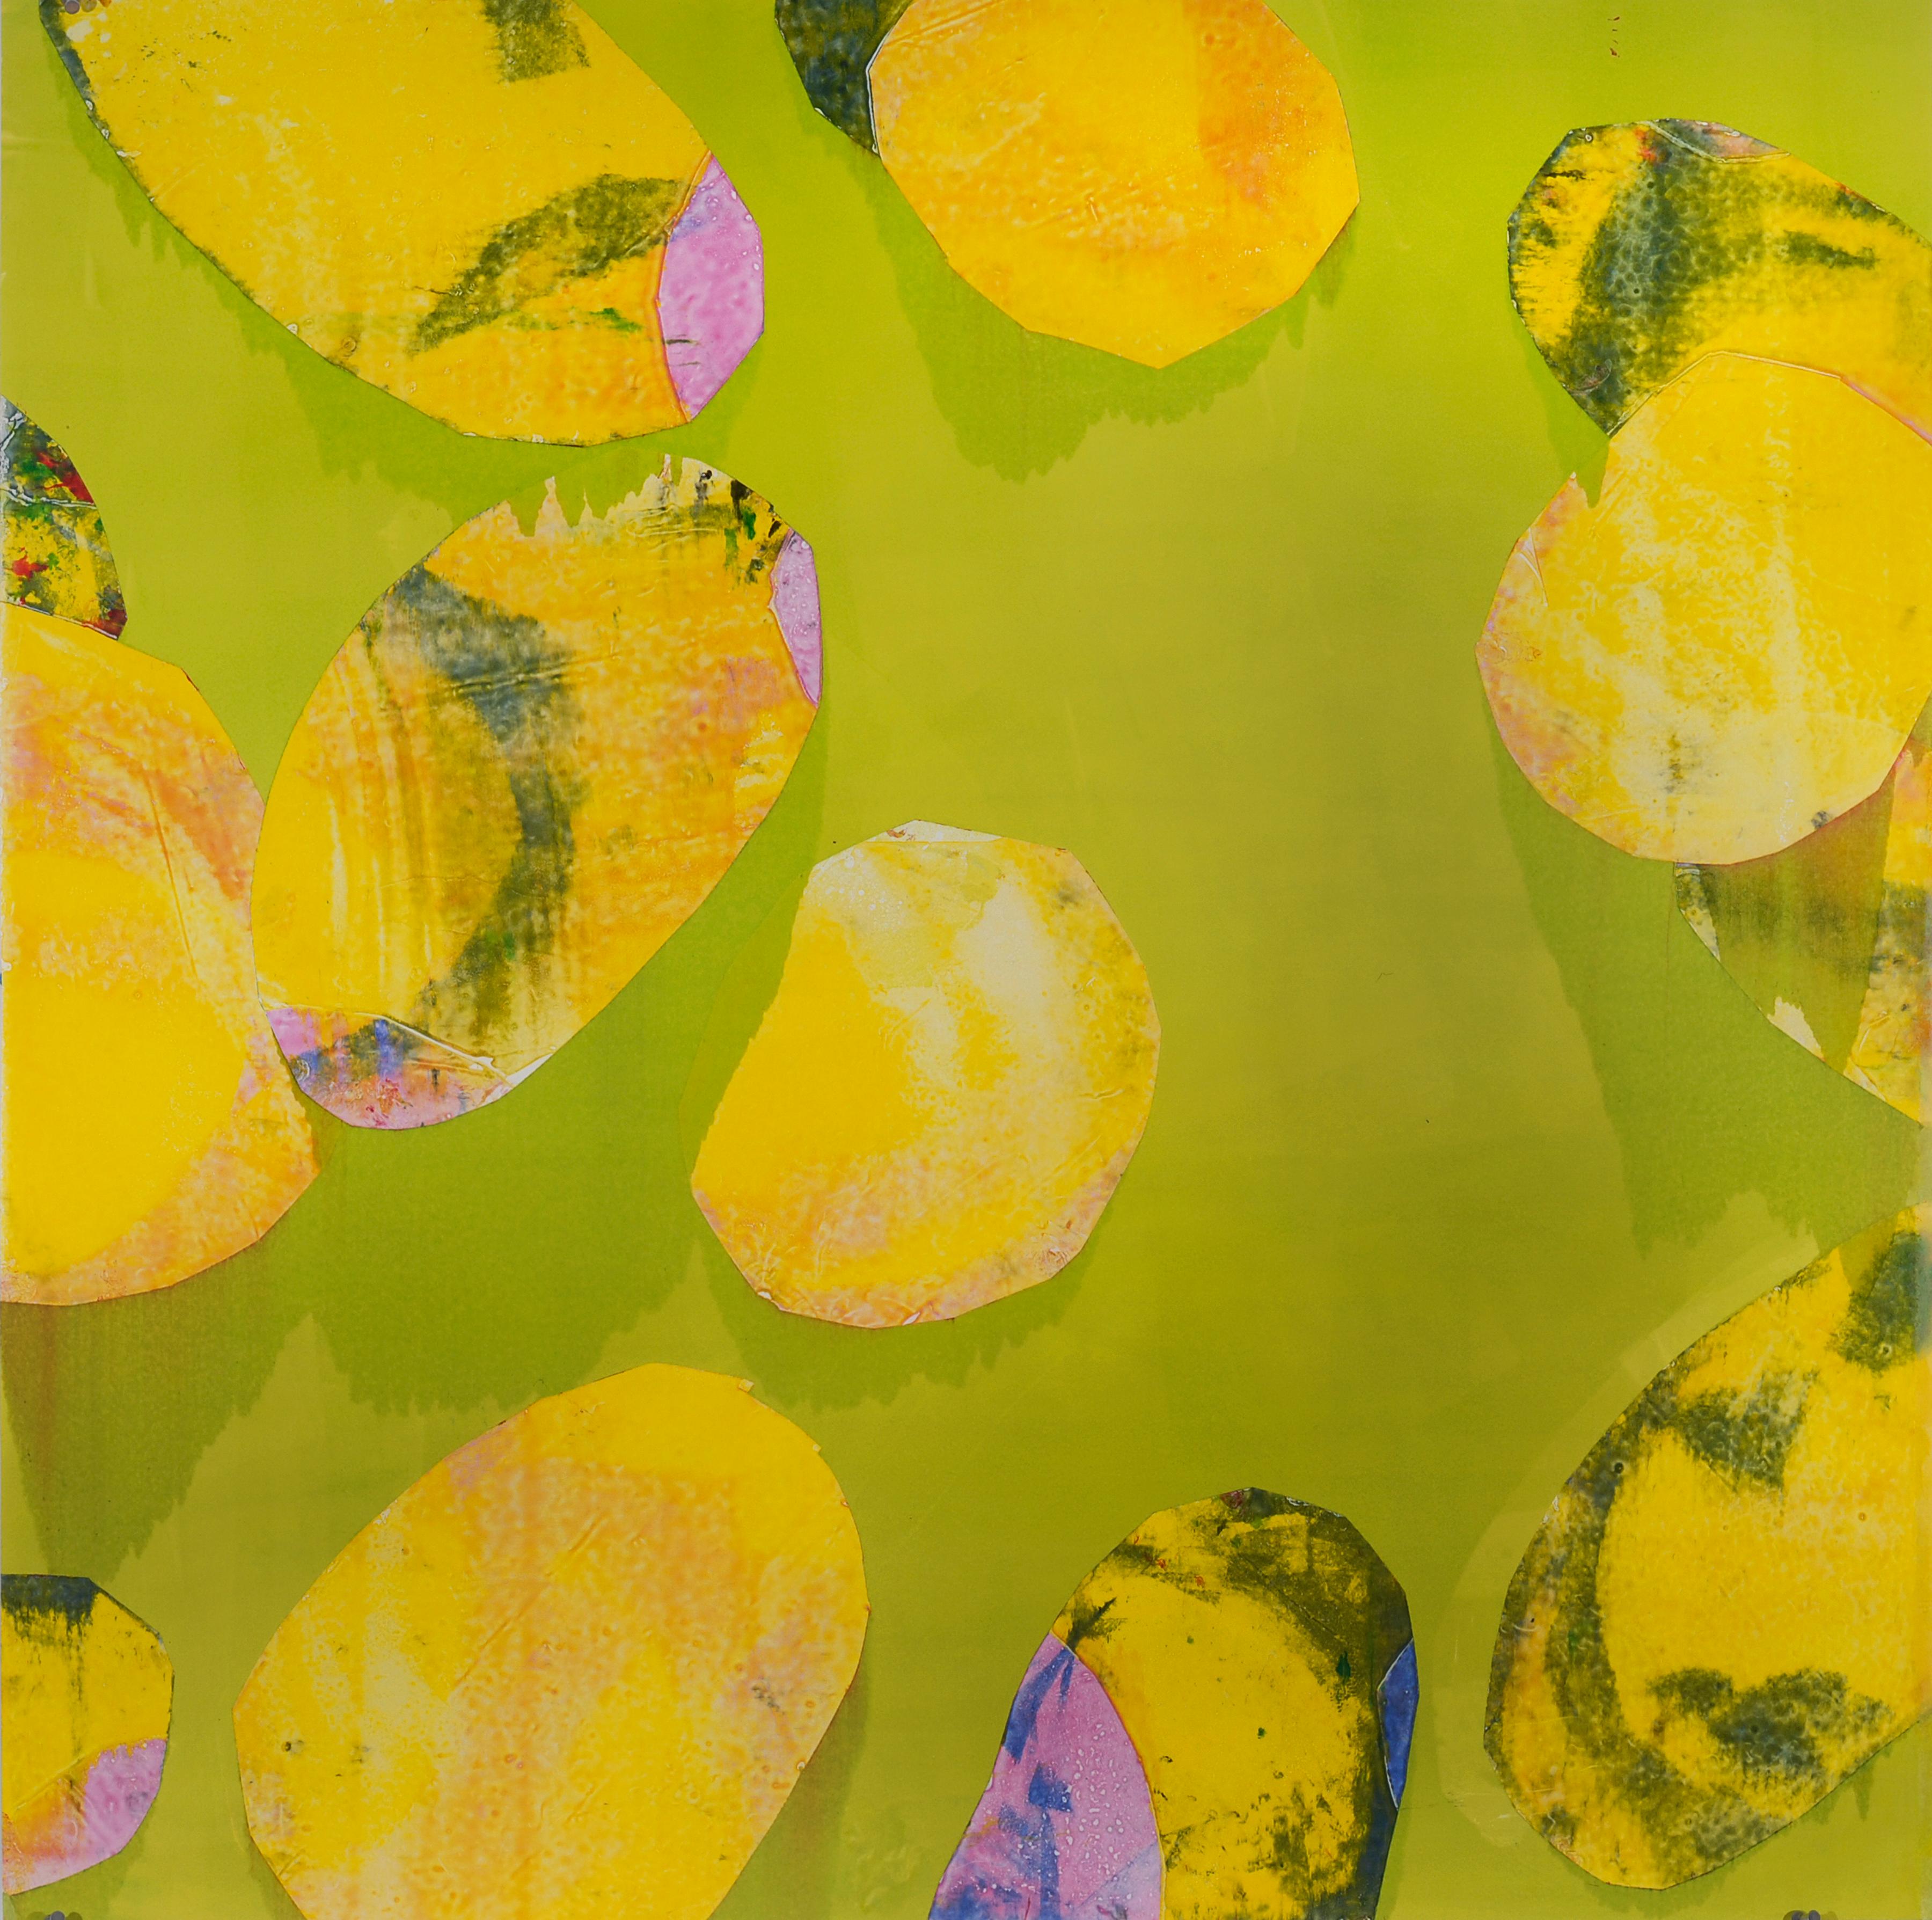 A limited edition print from Marylyn Dintenfass's Parallel Park series, "Caprice Classic"  features a tropical palette of bright yellow, lime green, and lavender. Yellow elliptical shapes evoking citrus fruit gather in a breezy composition. 